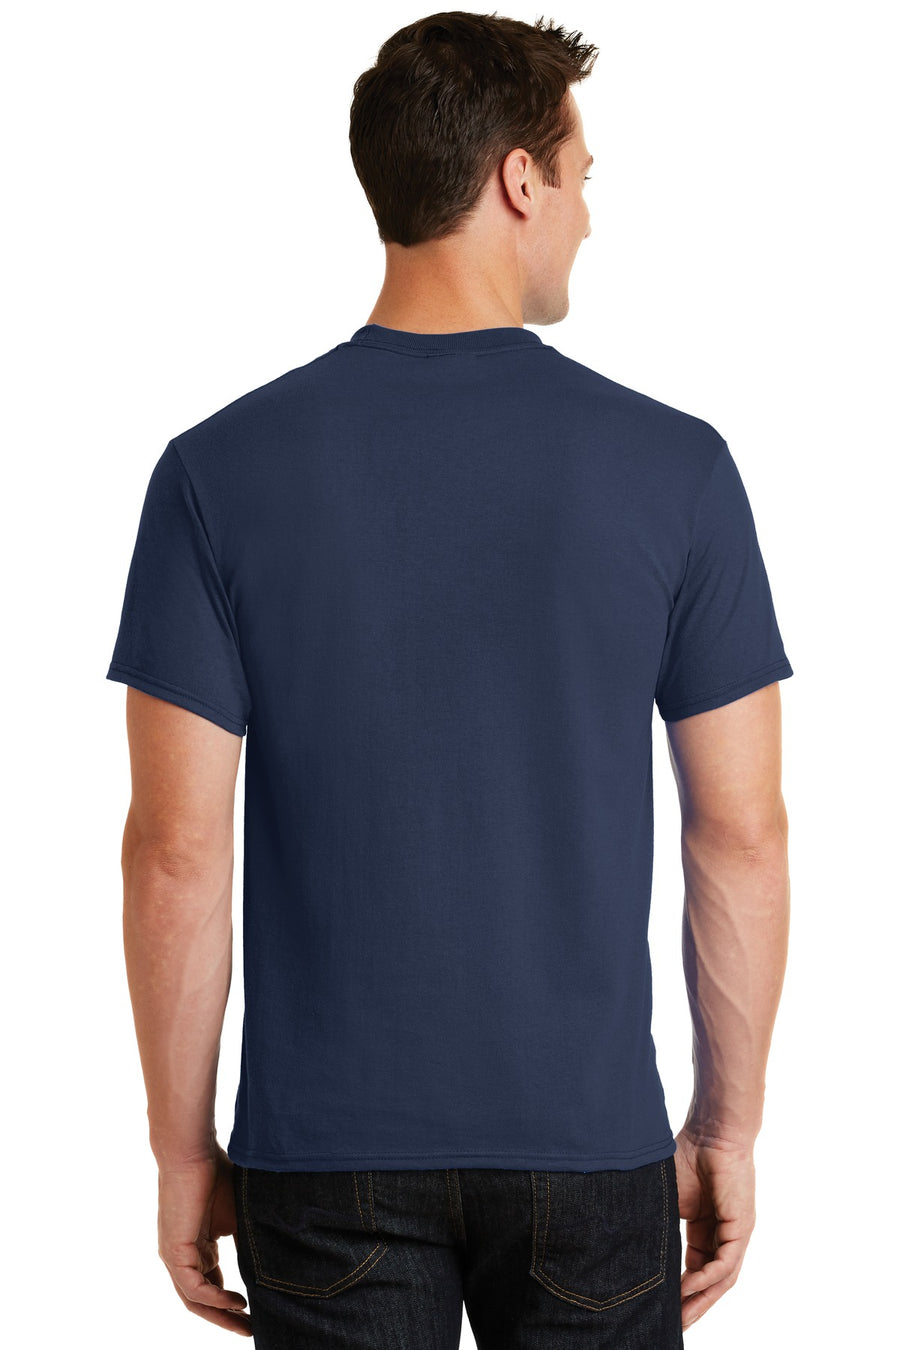 Port & Company® - Core Blend Tee. PC55 – On Game Day